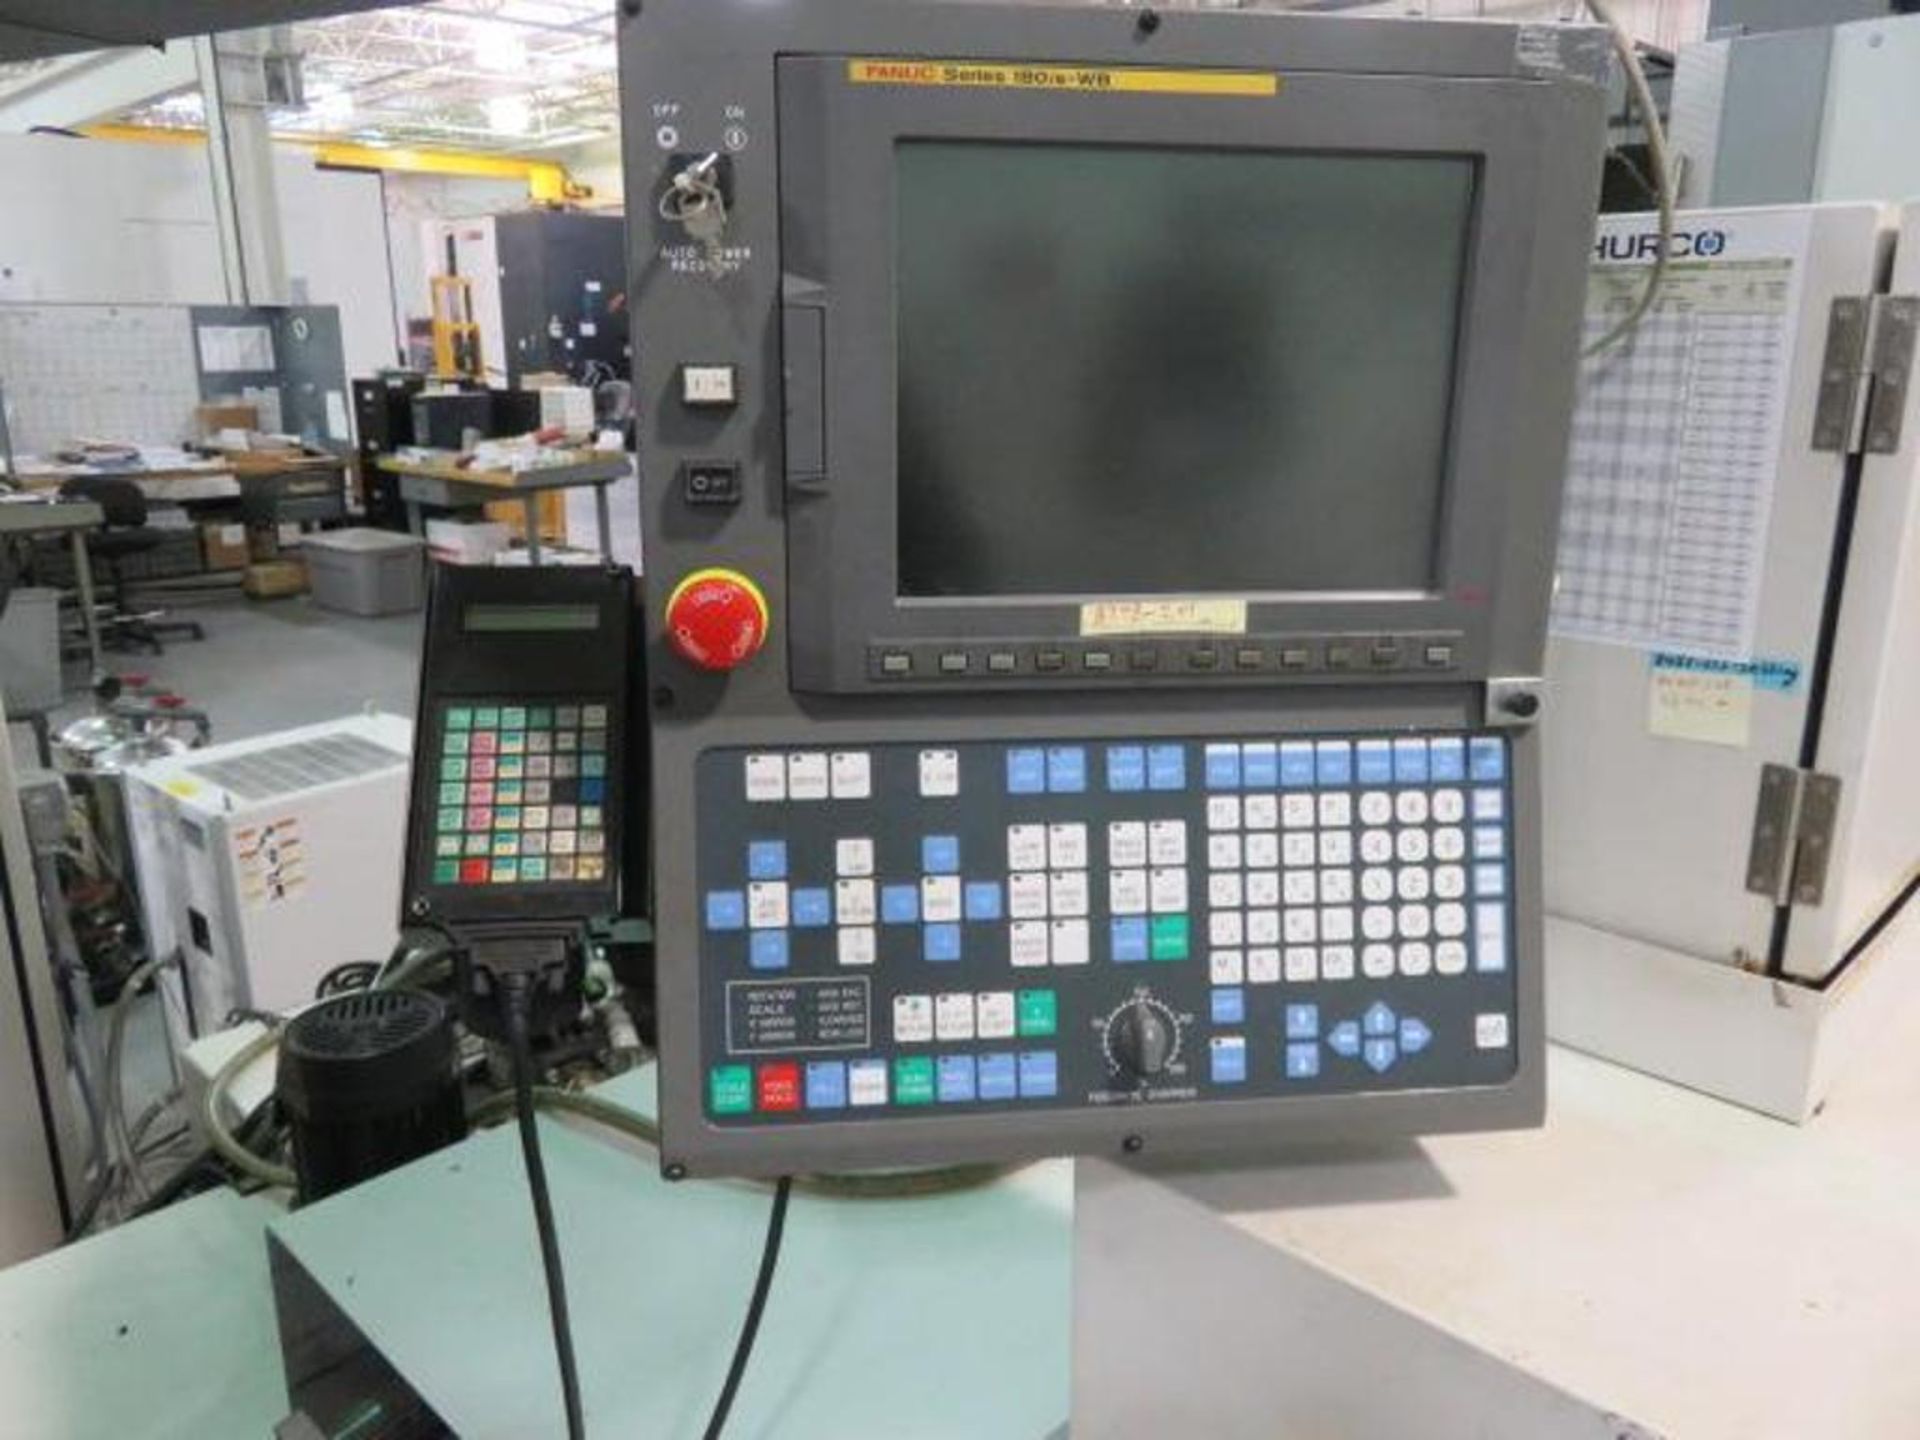 Fanuc 4-Axis CNC Wire EDM Machine Model Robocut AX-1iC, S/N P051C1571 (2005), 43 in. x 33 in. x 21 i - Image 5 of 6